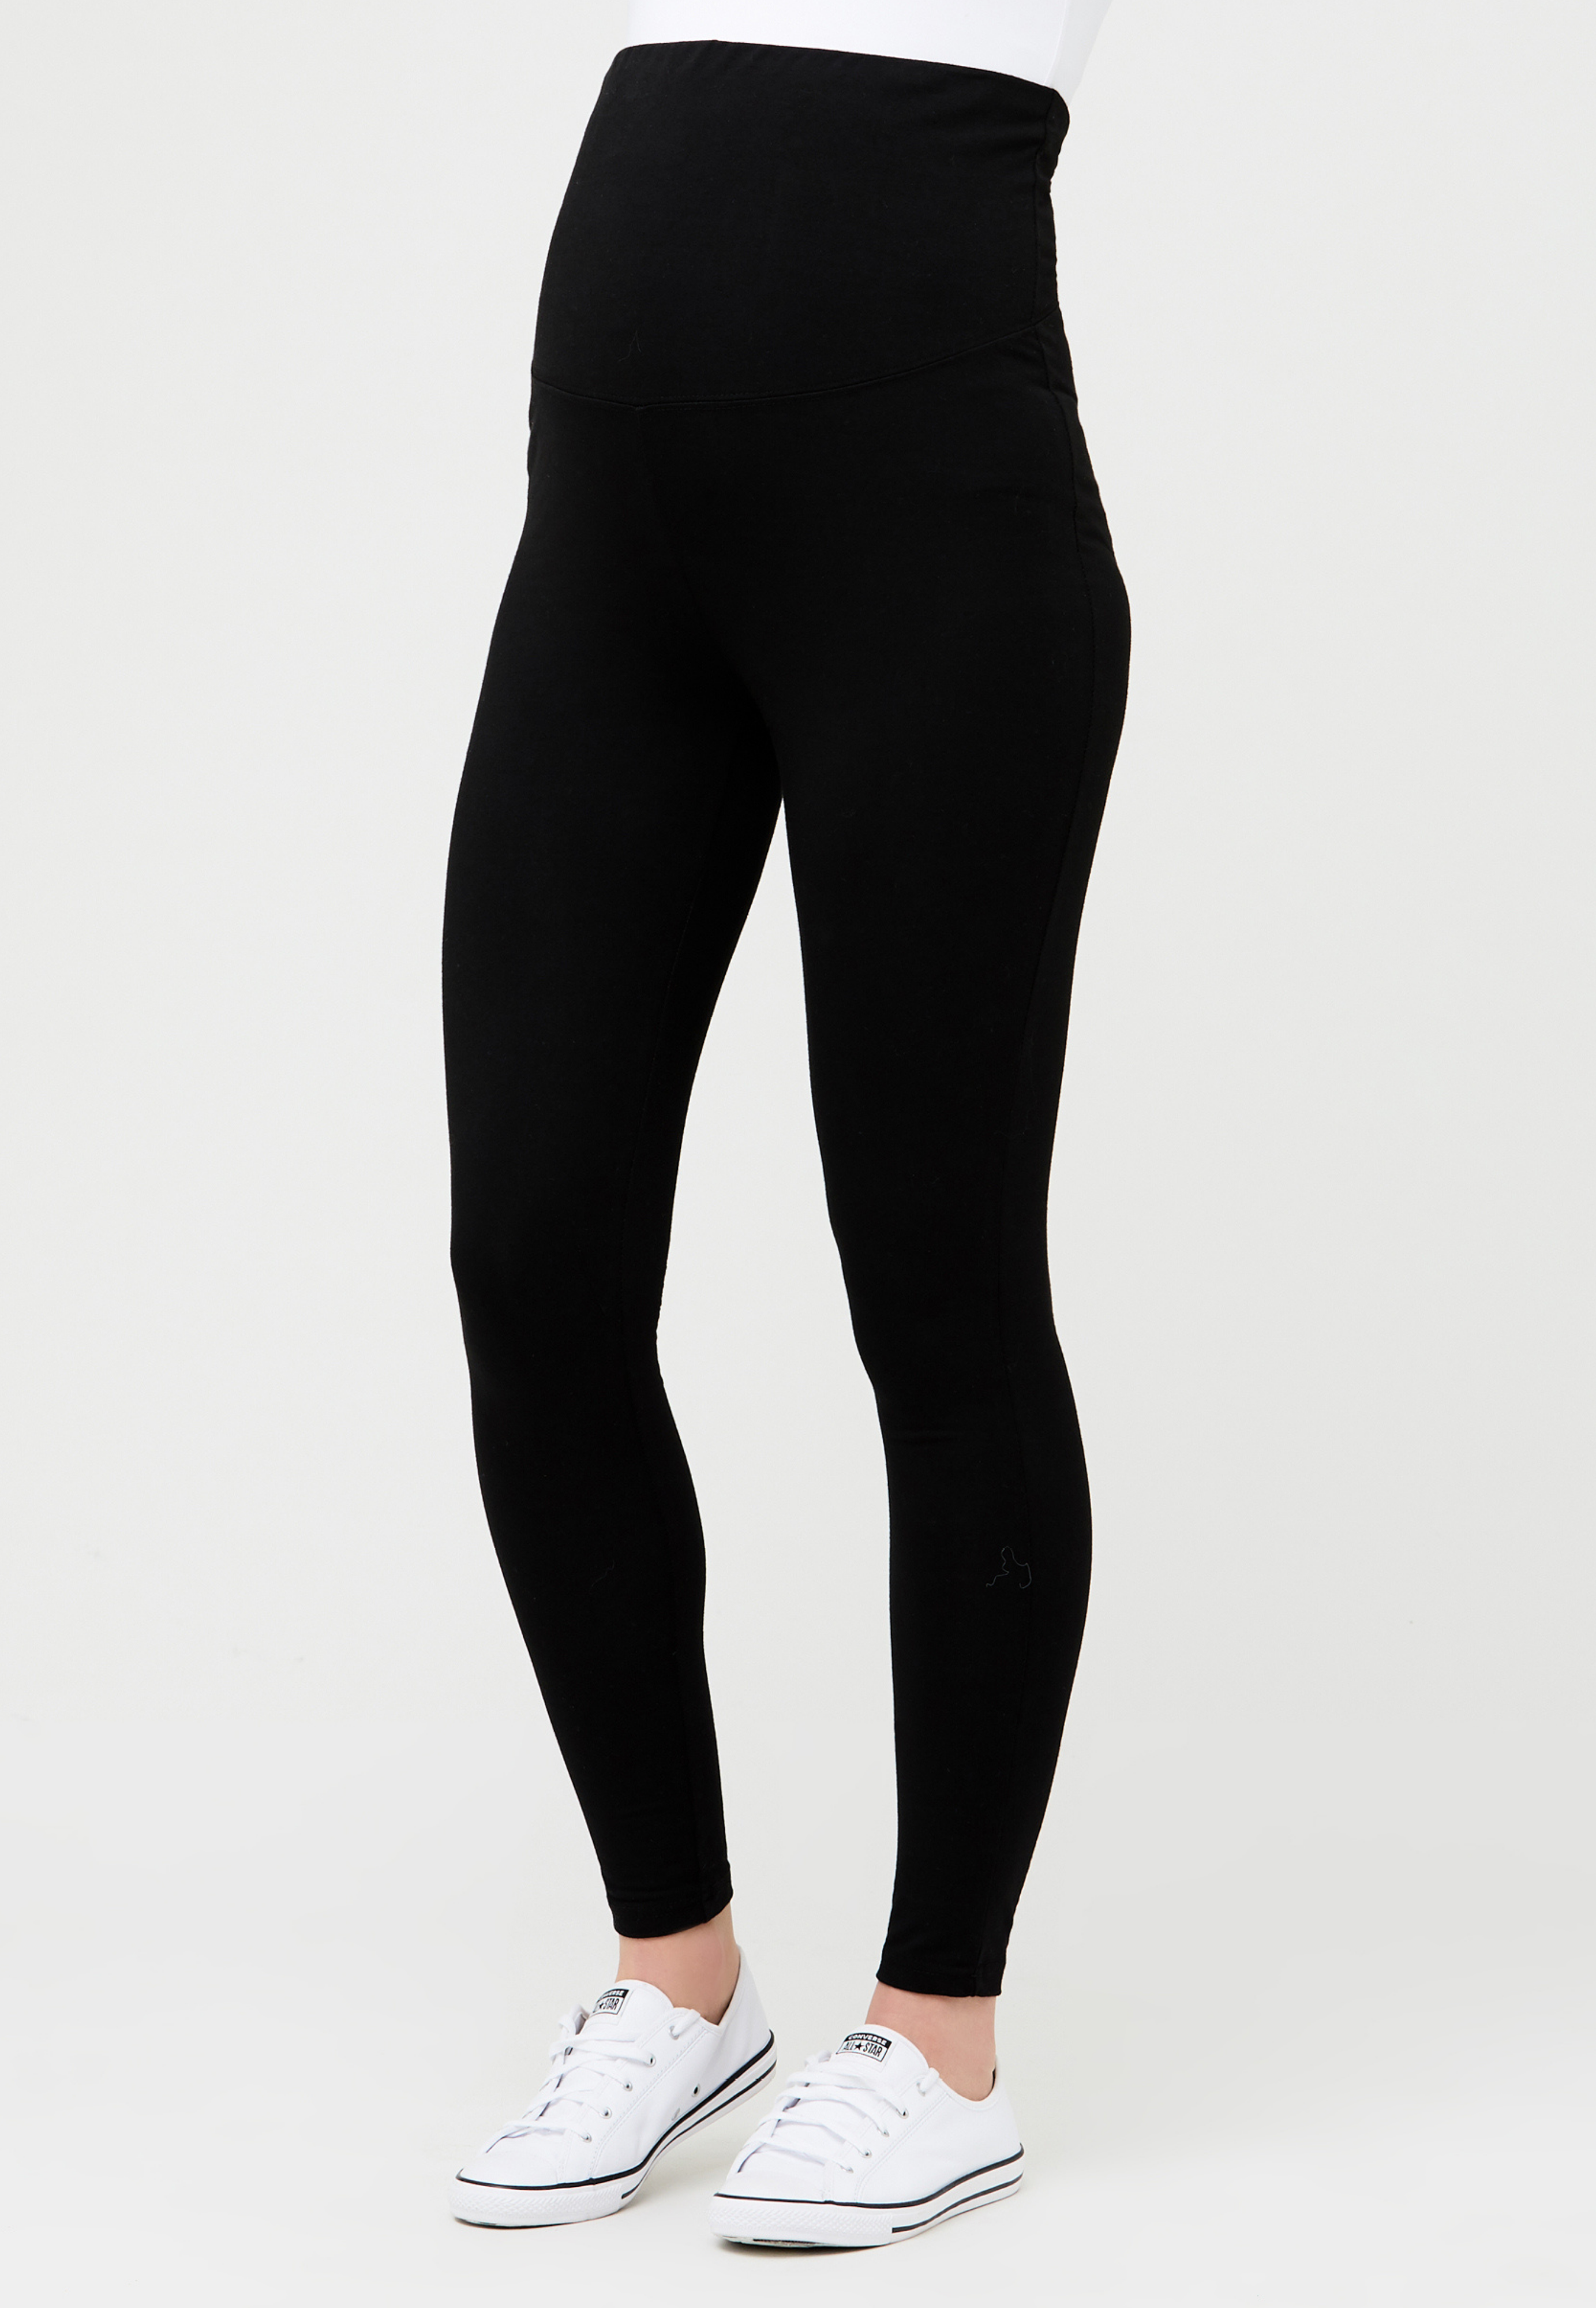 Buy Belly Support Maternity Legging in Canada at